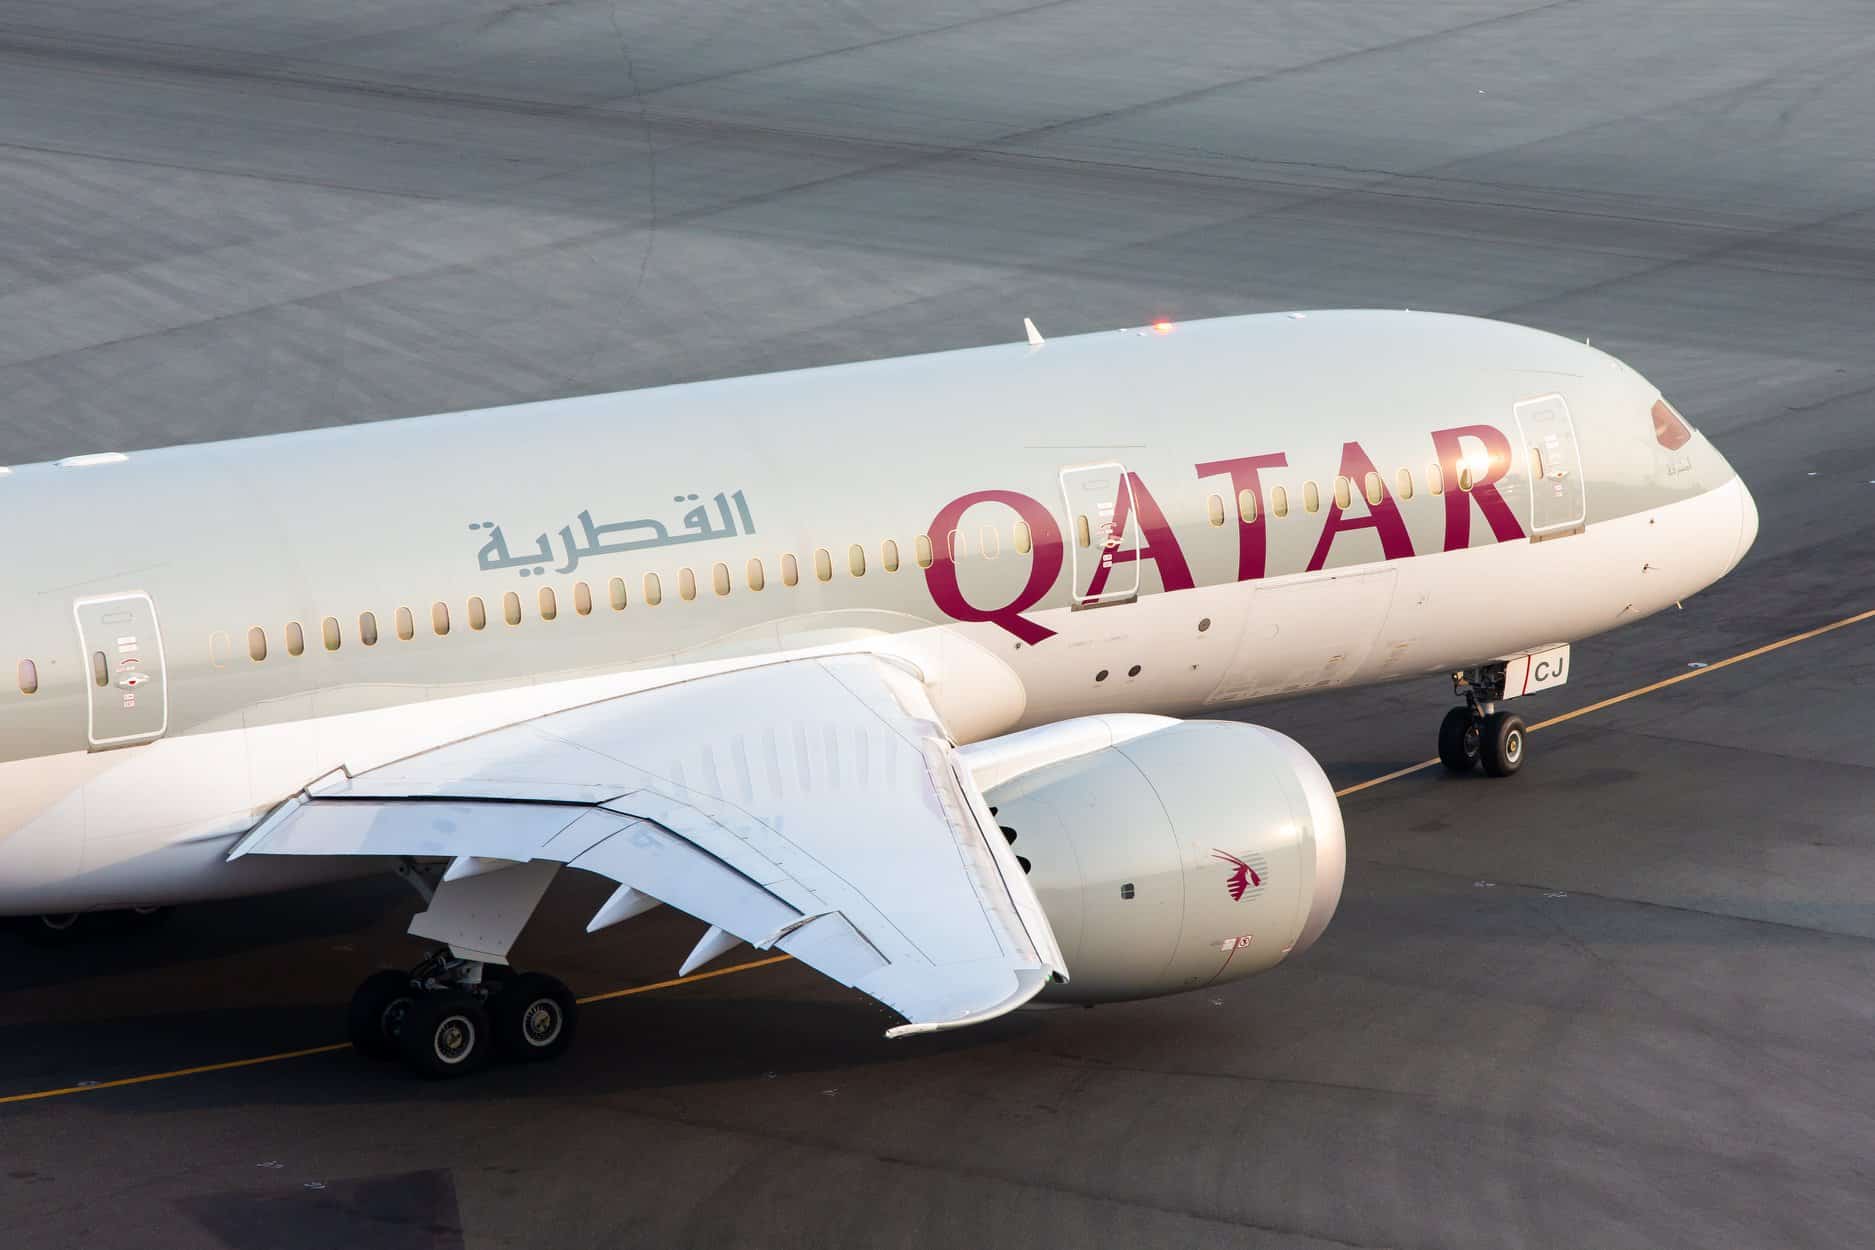 Qatar Airways network increases to more than 270 weekly flights to over